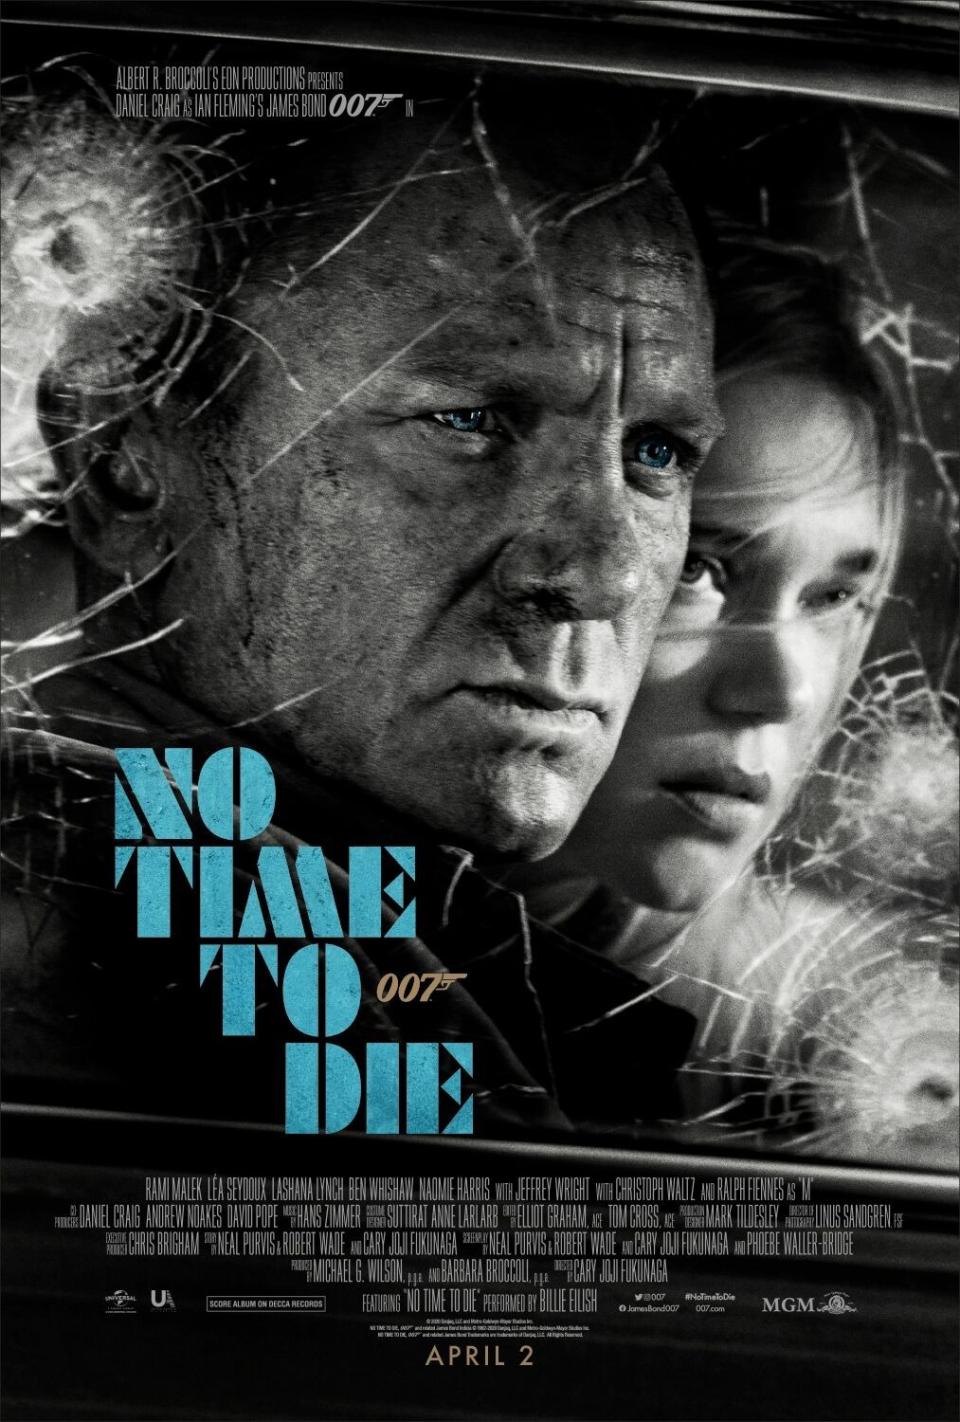 James bond no time to die release date malaysia